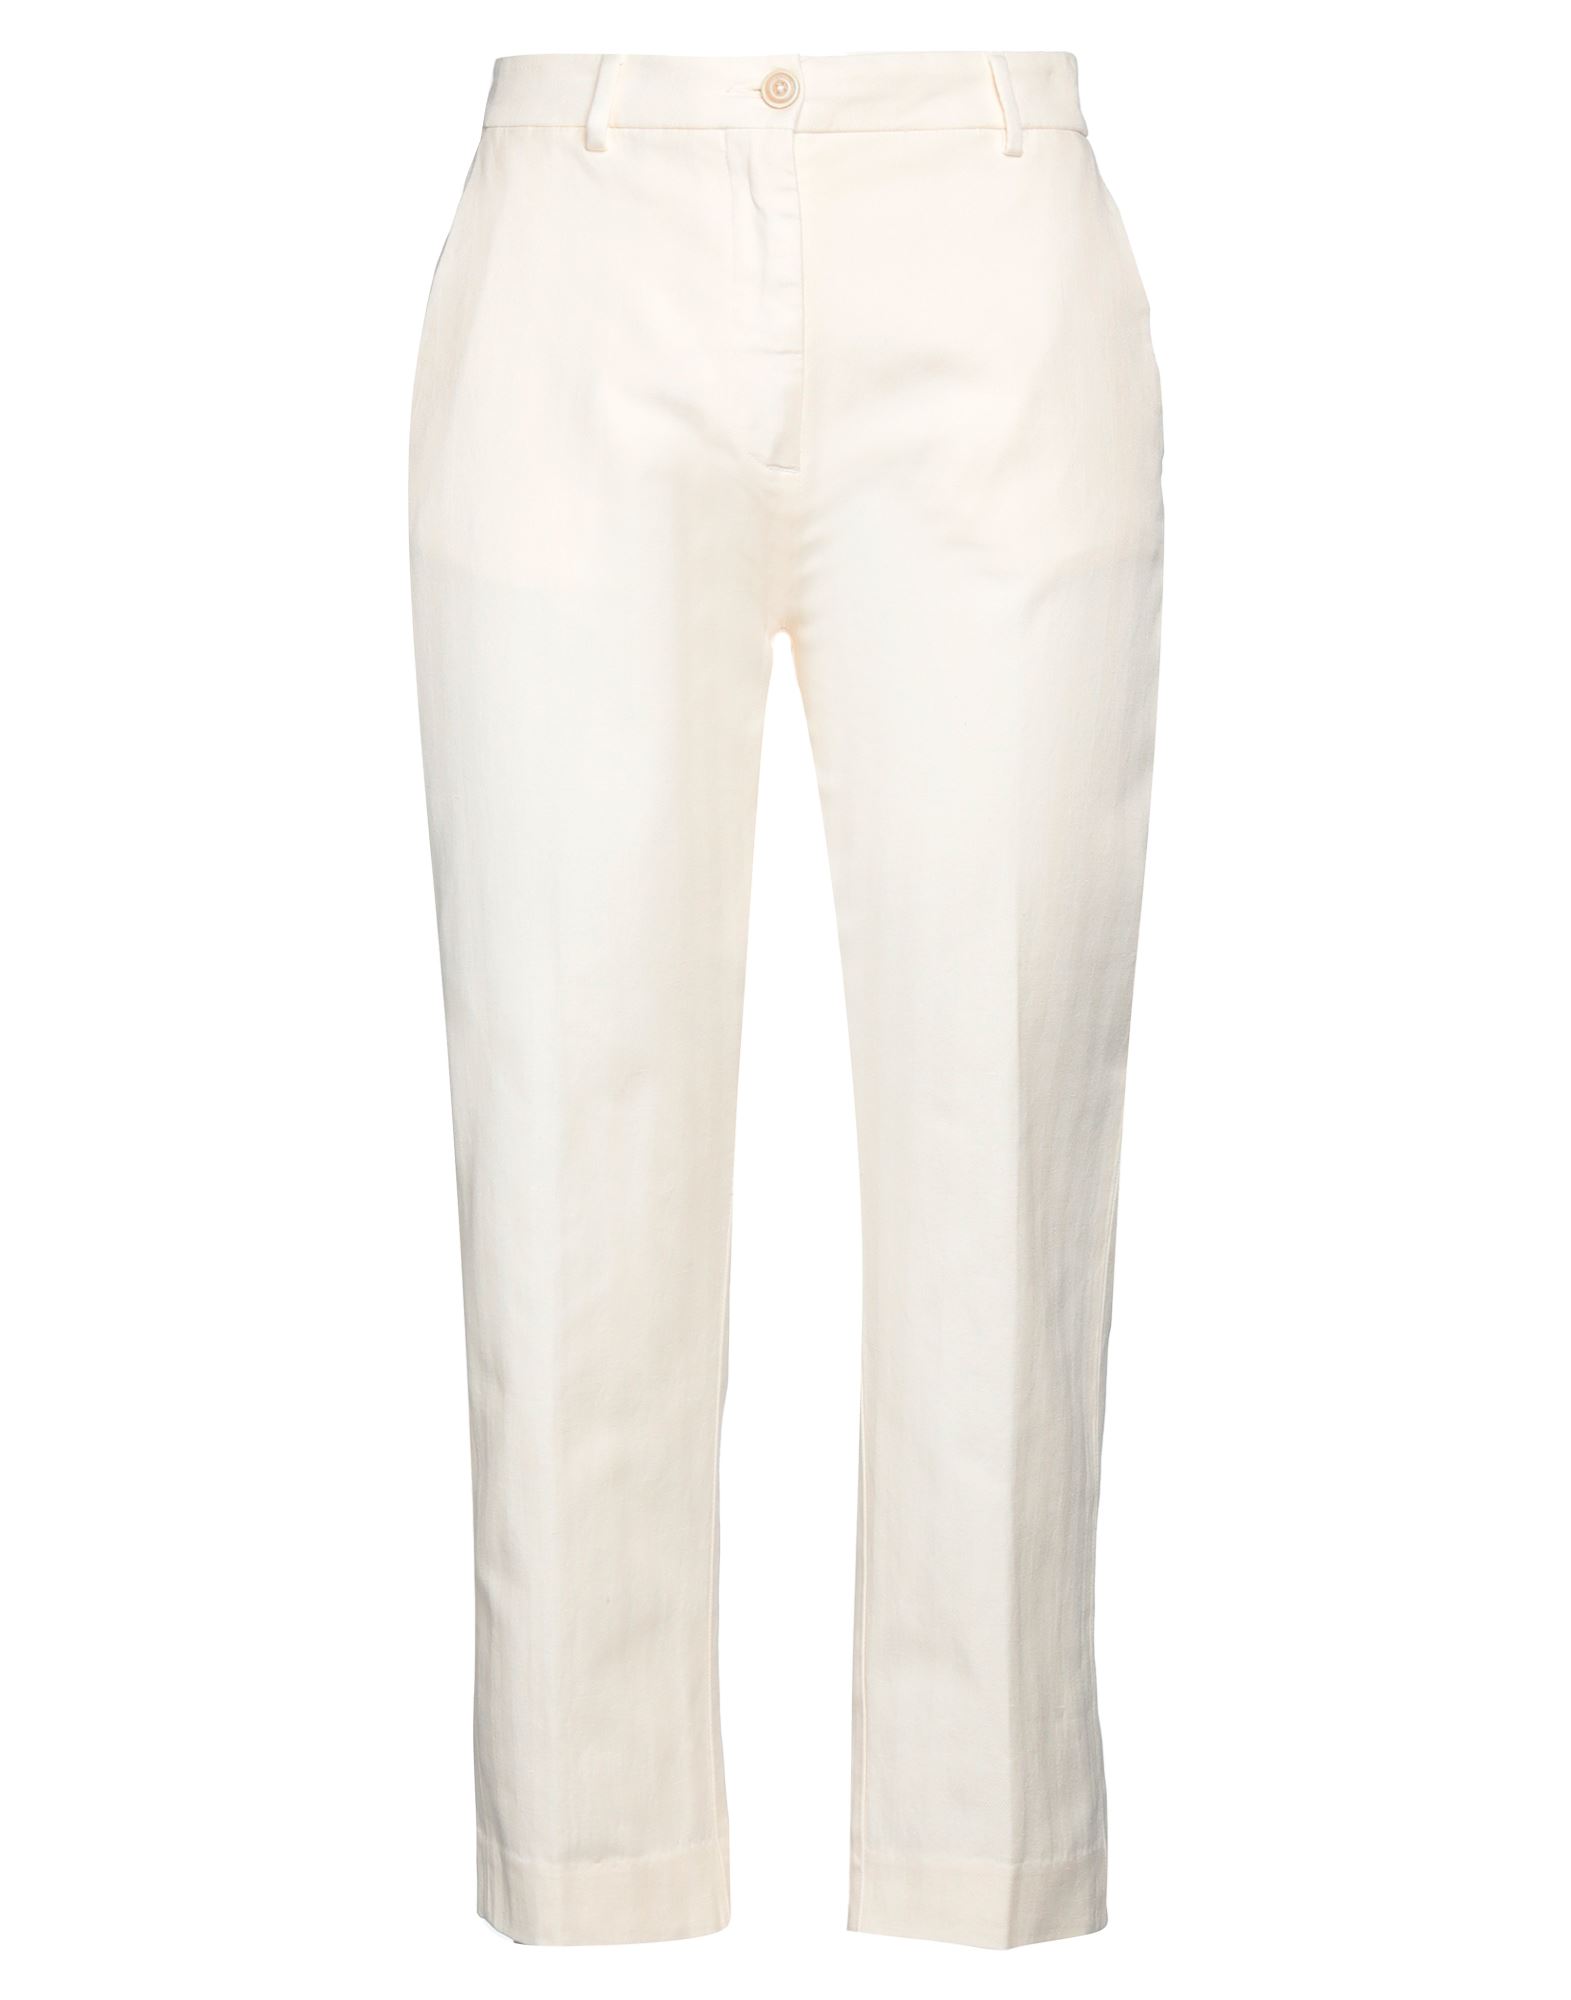 Pence Woman Pants Ivory Size 8 Cotton, Linen, Elastane In White